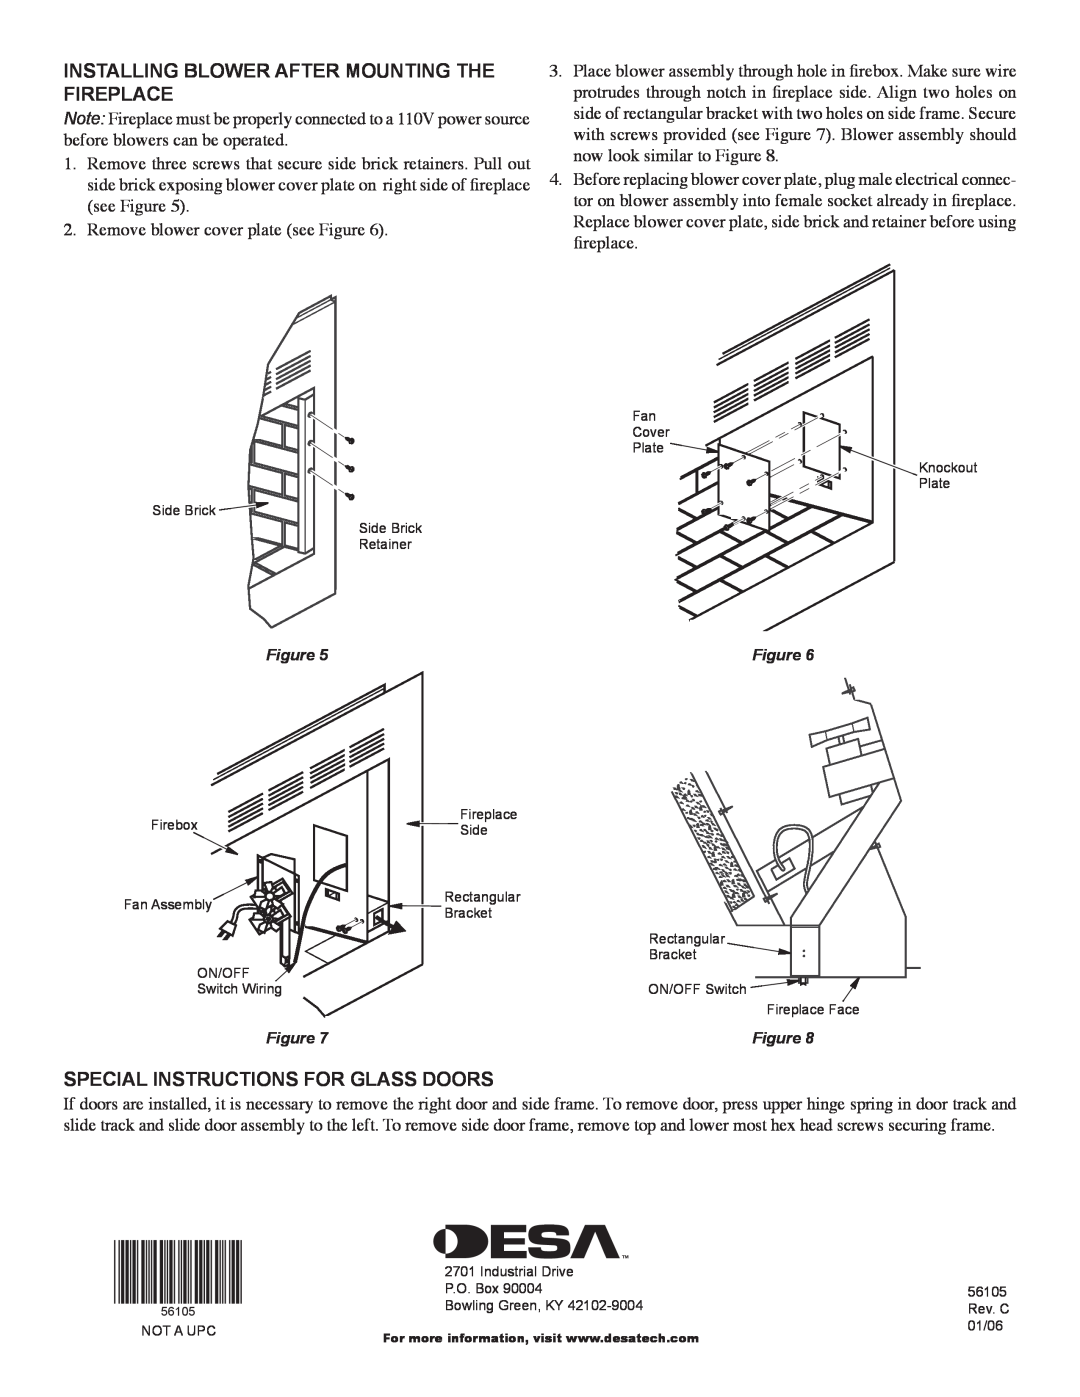 Desa VCBK4L, VCBK4R manual Installing Blower After Mounting The Fireplace, Special Instructions For Glass Doors 